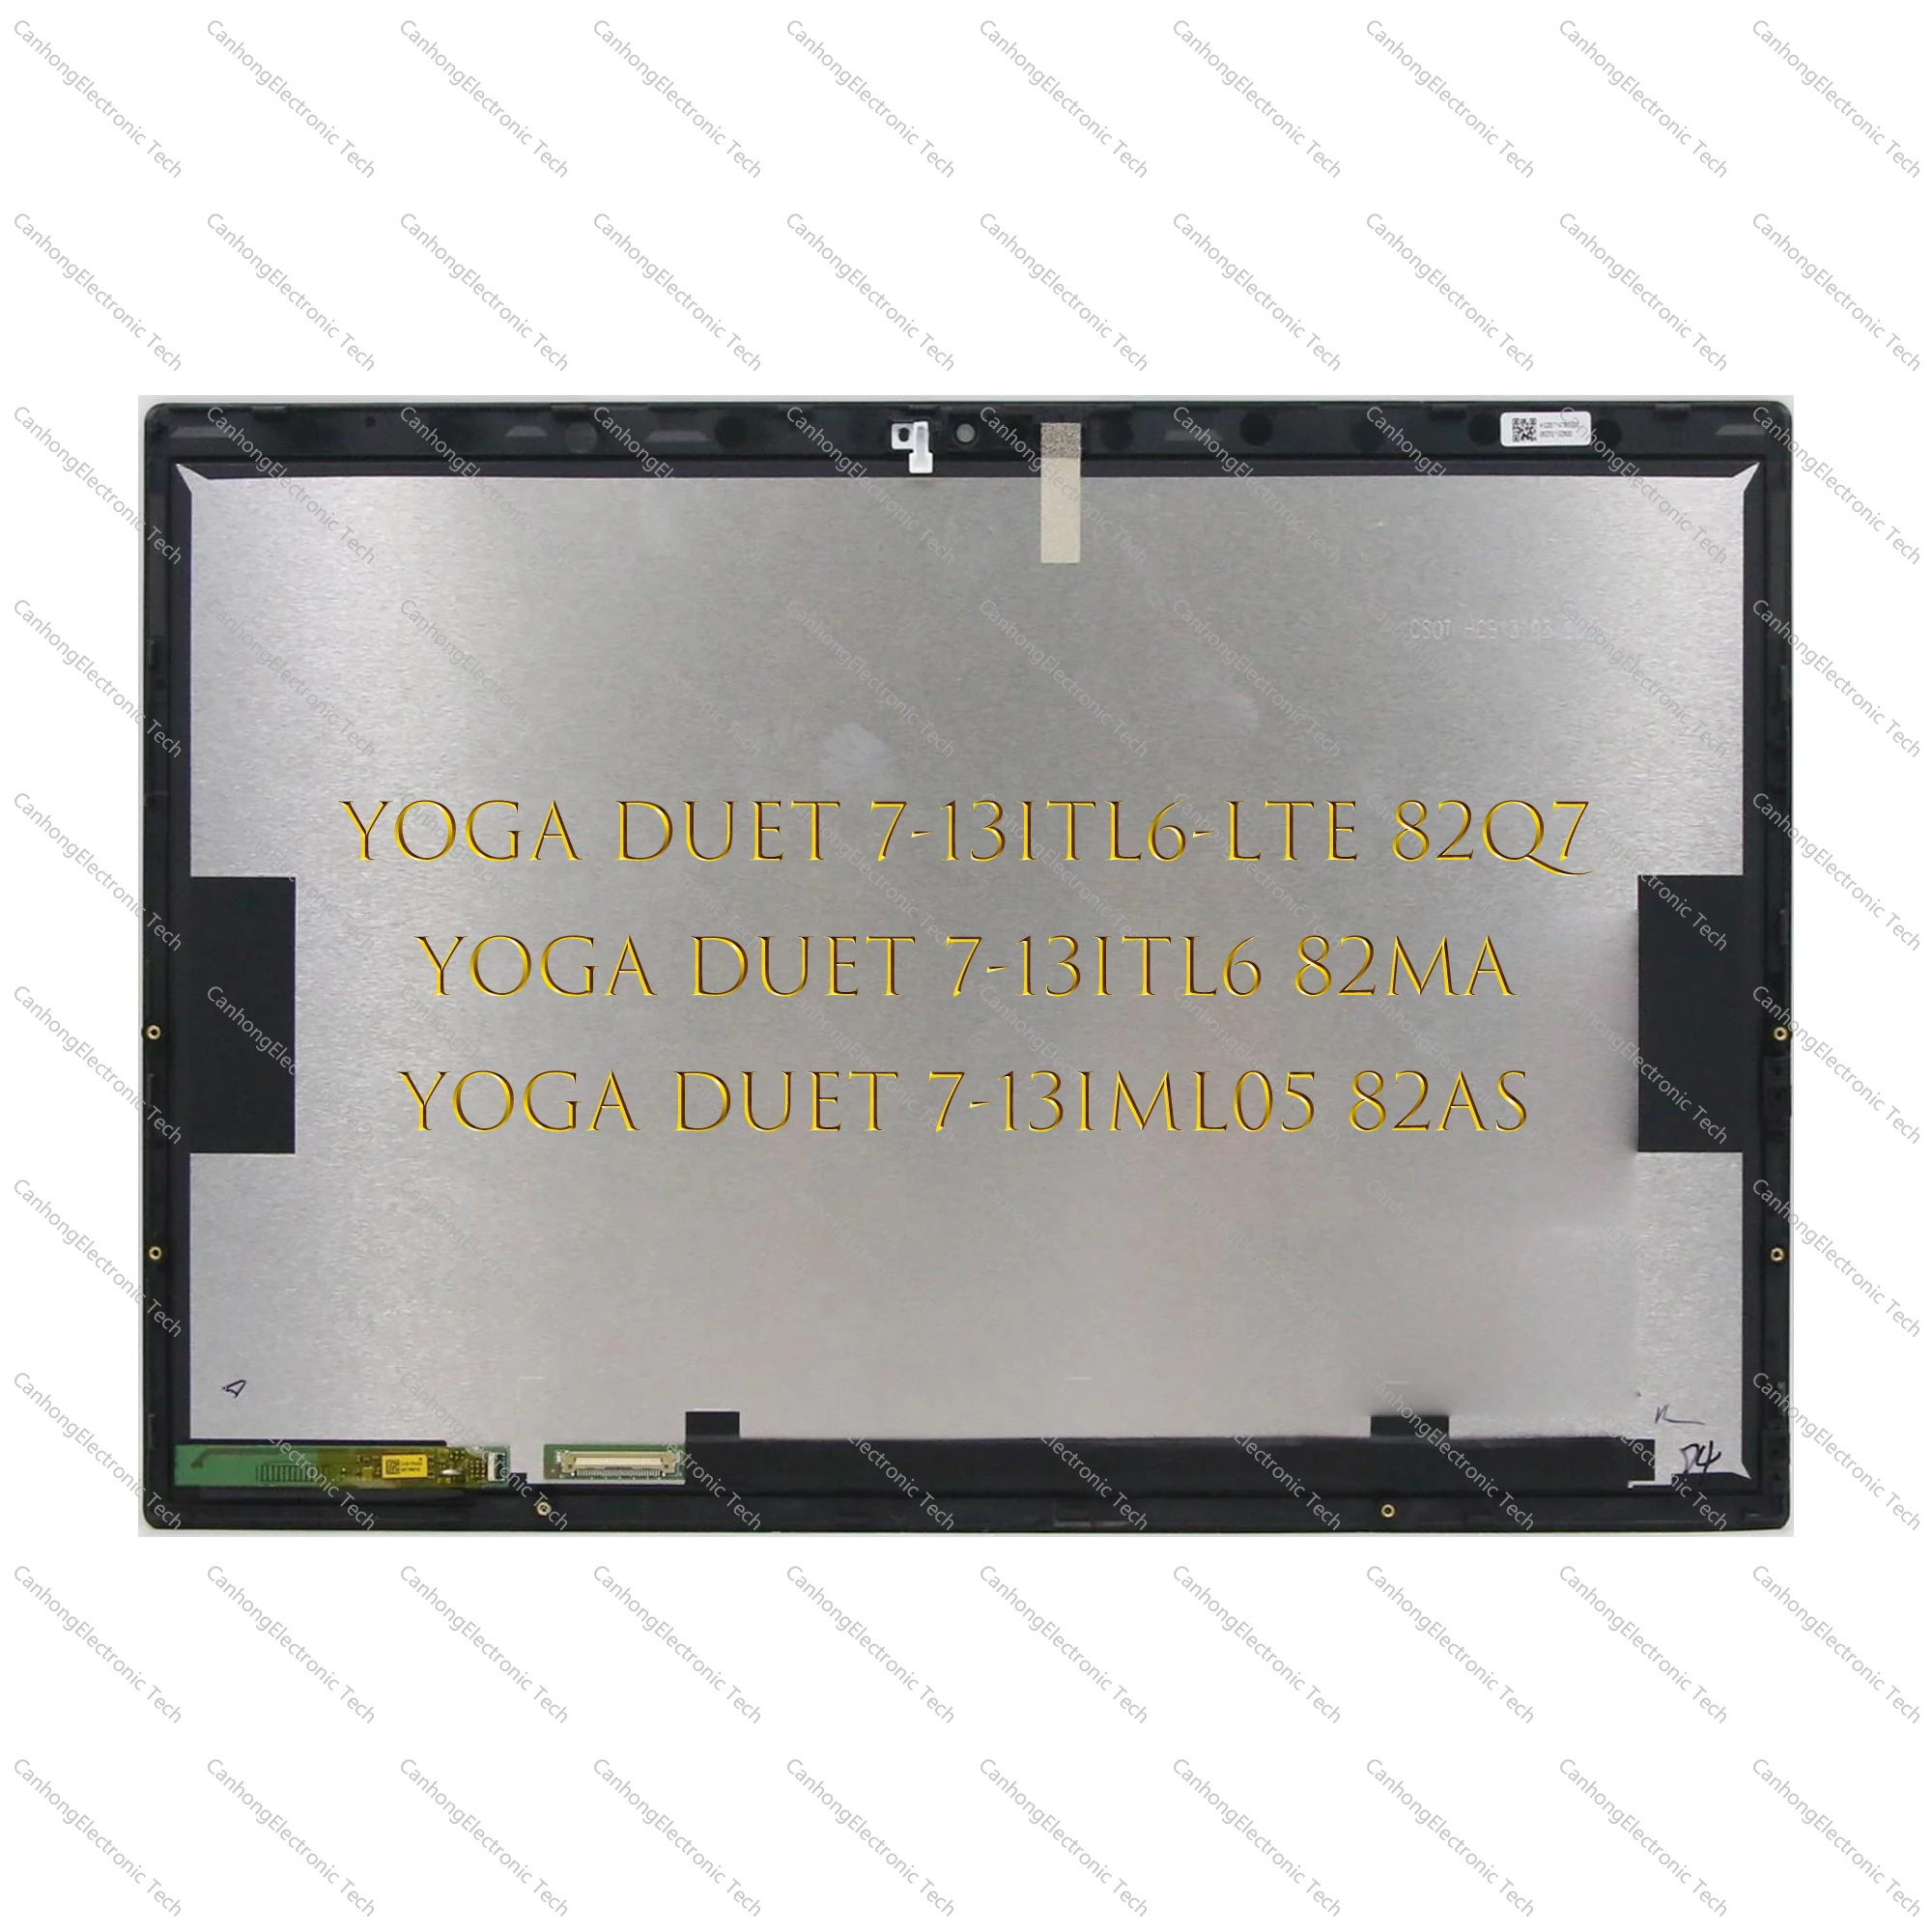 For Lenovo Duet 7-13 Duet 7-13ITL6-LTE 82Q7 Yoga Duet 7-13ITL6 82MA Yoga Duet 7-13IML05 82AS  13-Inch LCD Touch Screen Assembly